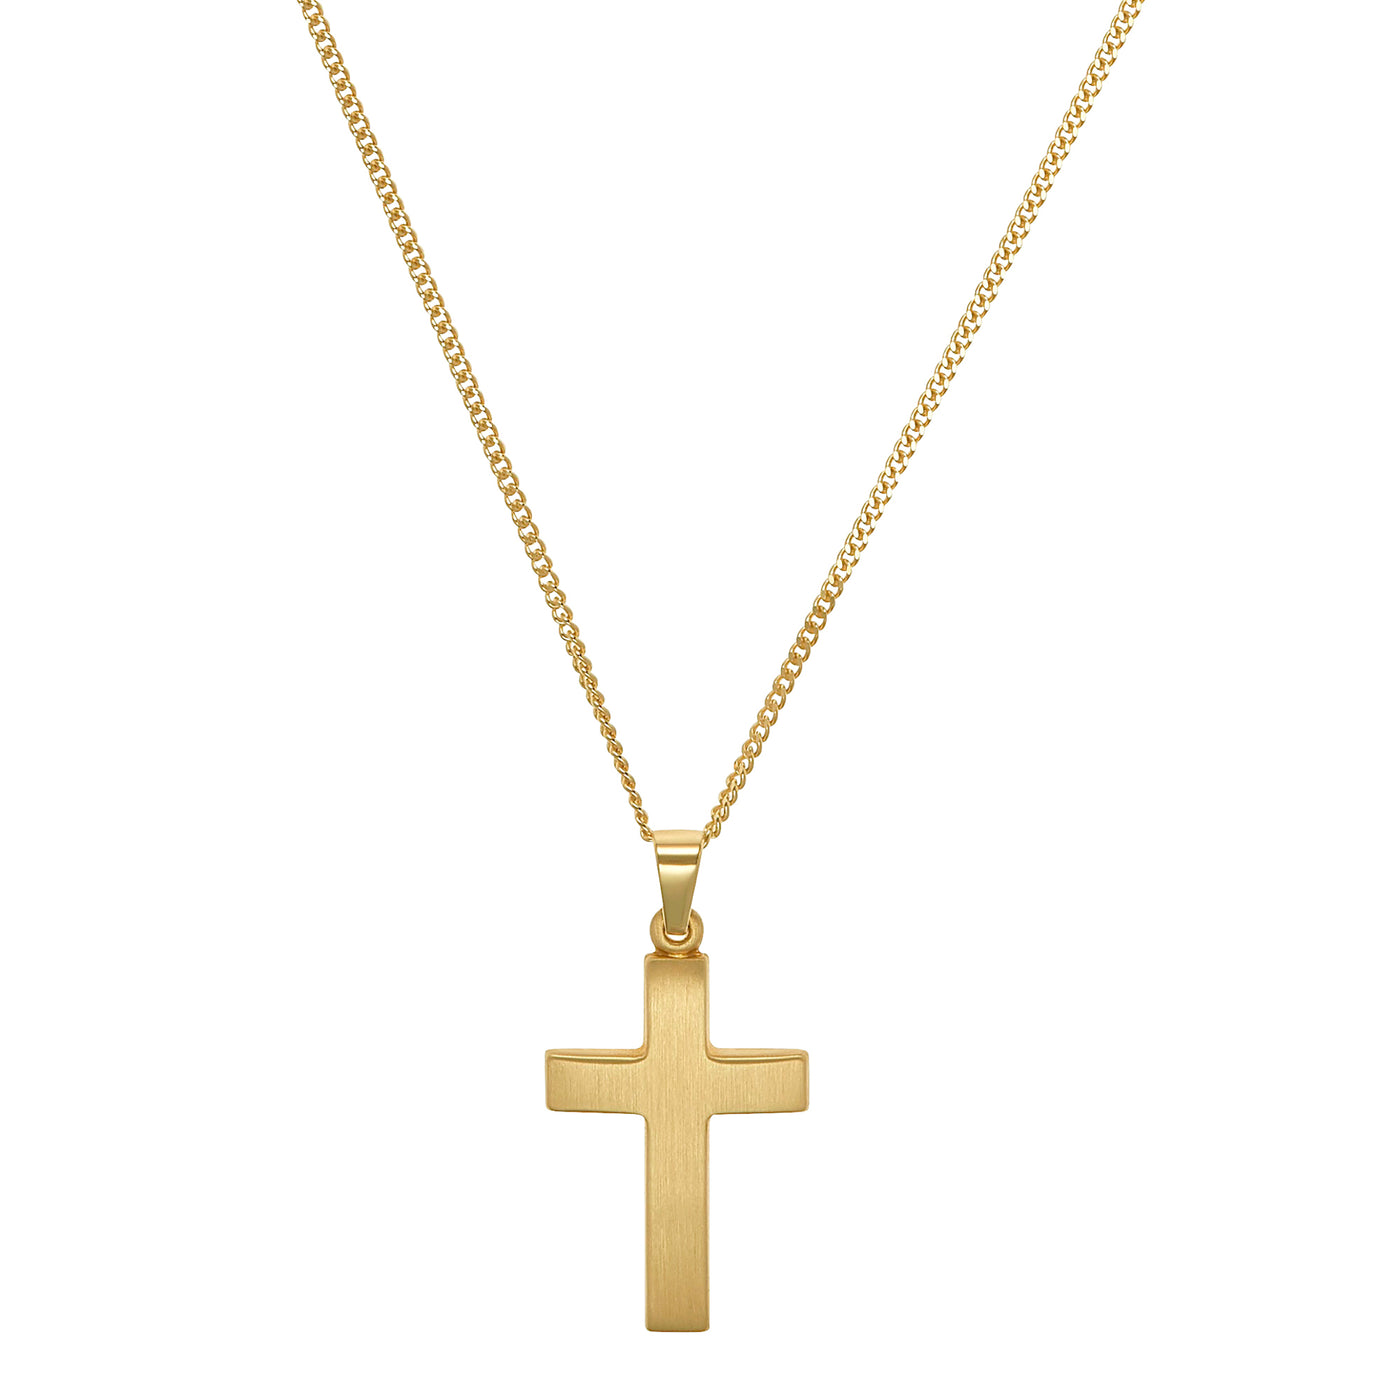 CROSS FROSTED NECKLACE 585 GOLD - IDENTIM®